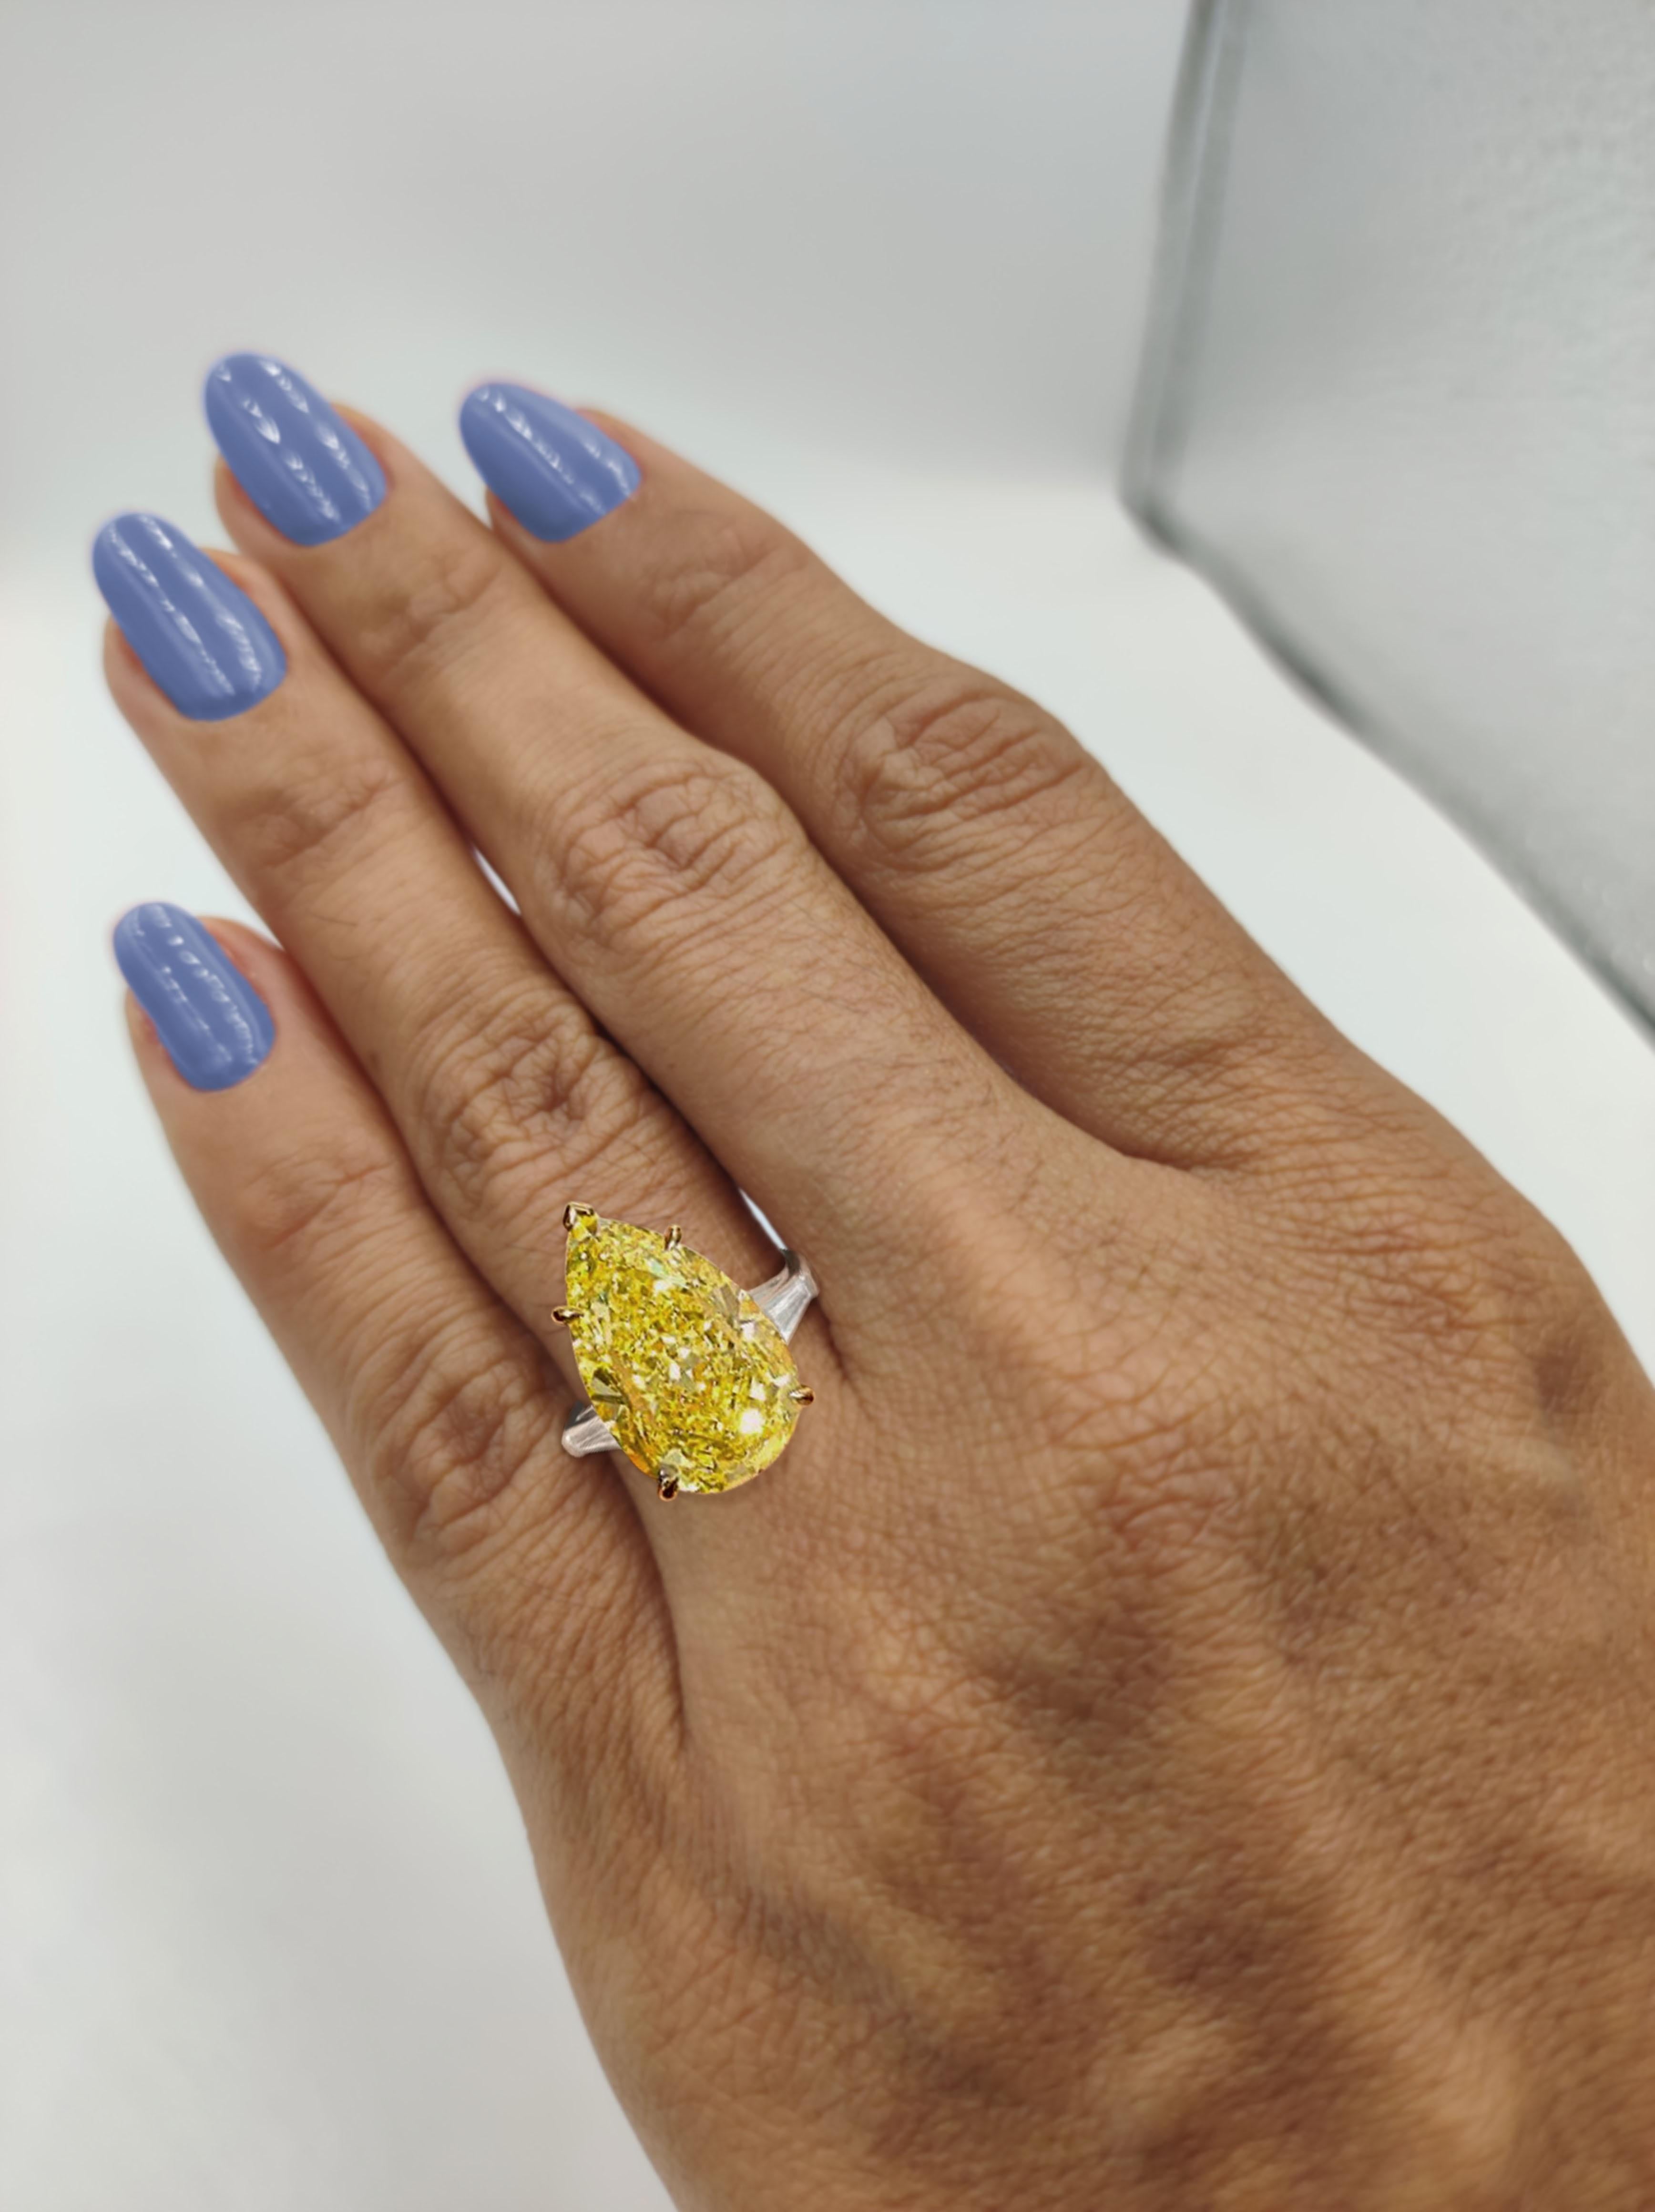 Stunning fancy intense yellow diamond (looks fancy vivid in the ring) with white diamond double halo basket, GIA certified. High jewelry by Antinori di Sanpietro ROMA
8.25 carats total diamond weight.
0.80 carat tapered shape diamond, Fancy intense